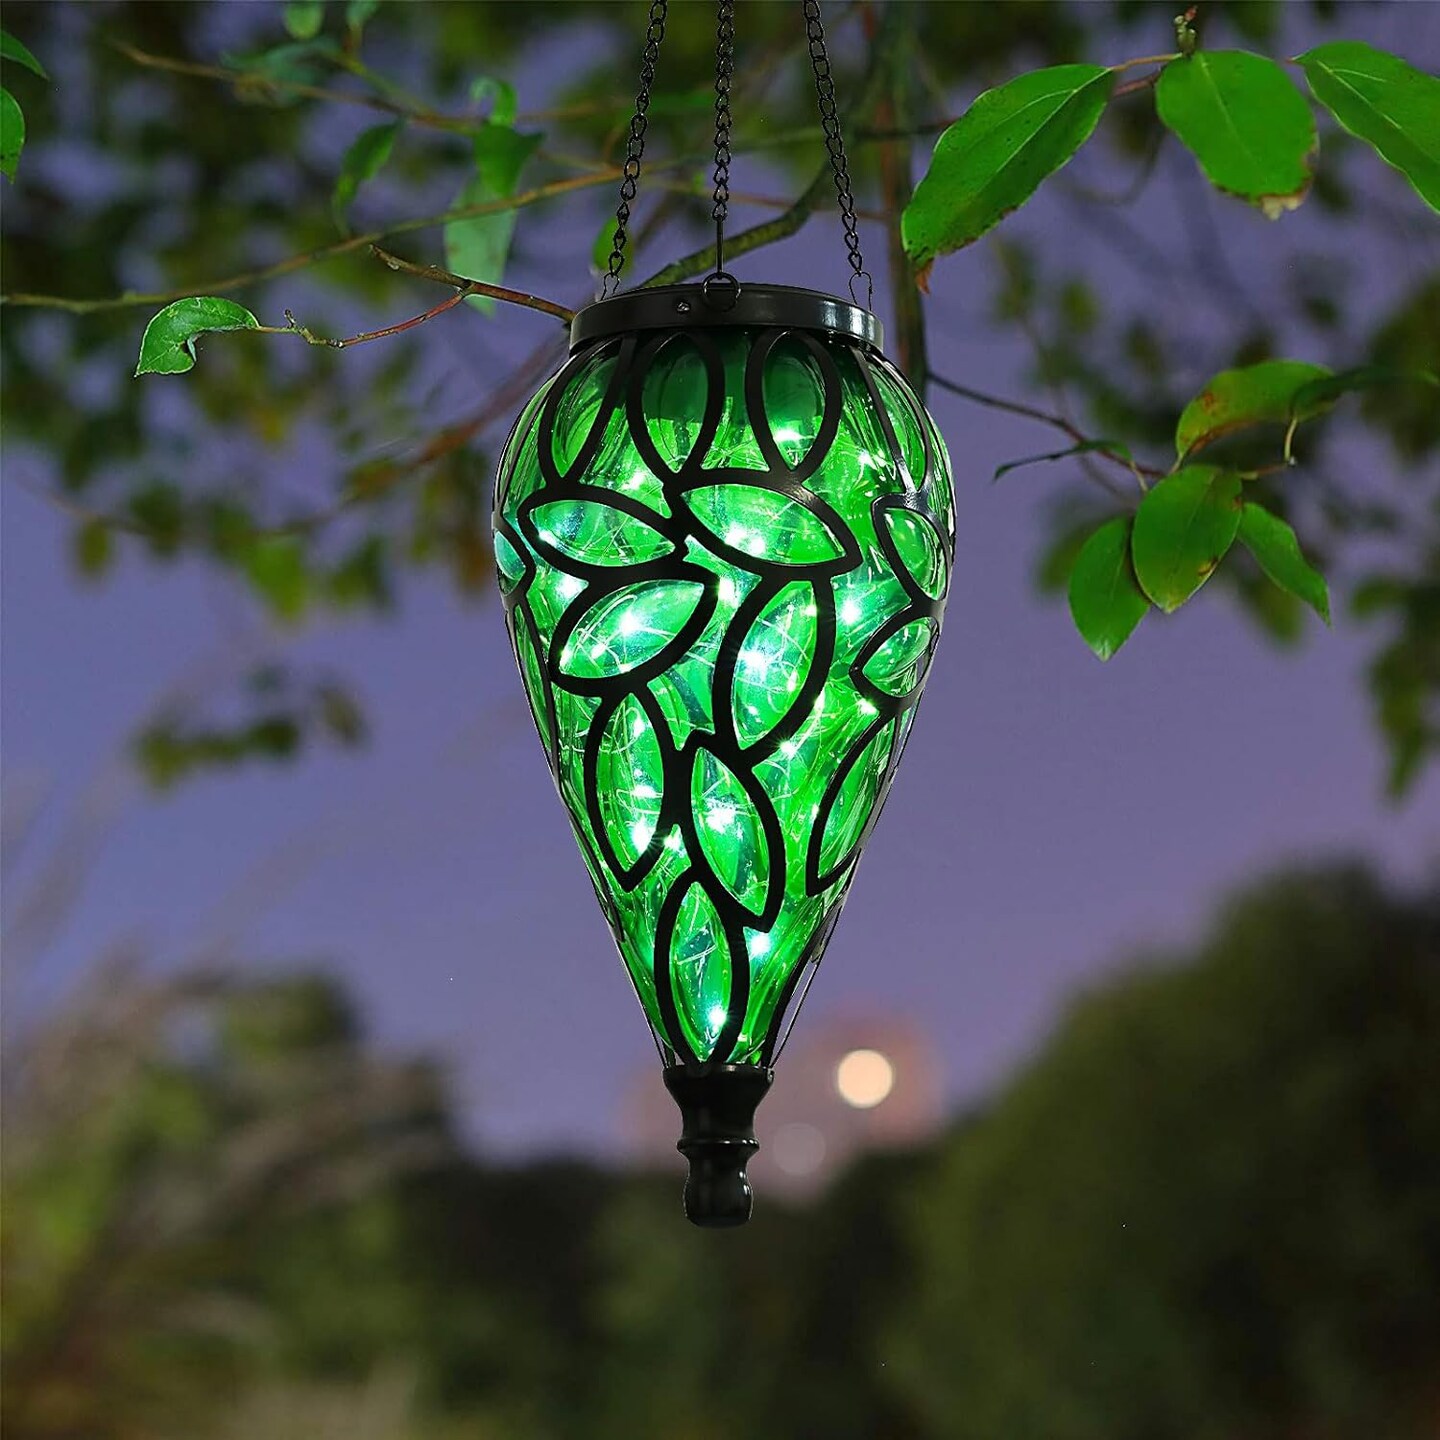 Garden Decorative Solar Lights for Patio, Lawn, and Backyard: 15 Cool White LEDs Twinkle Effect Tear-Shaped Hanging Lantern Decor Outdoor Plastic Solar Lantern